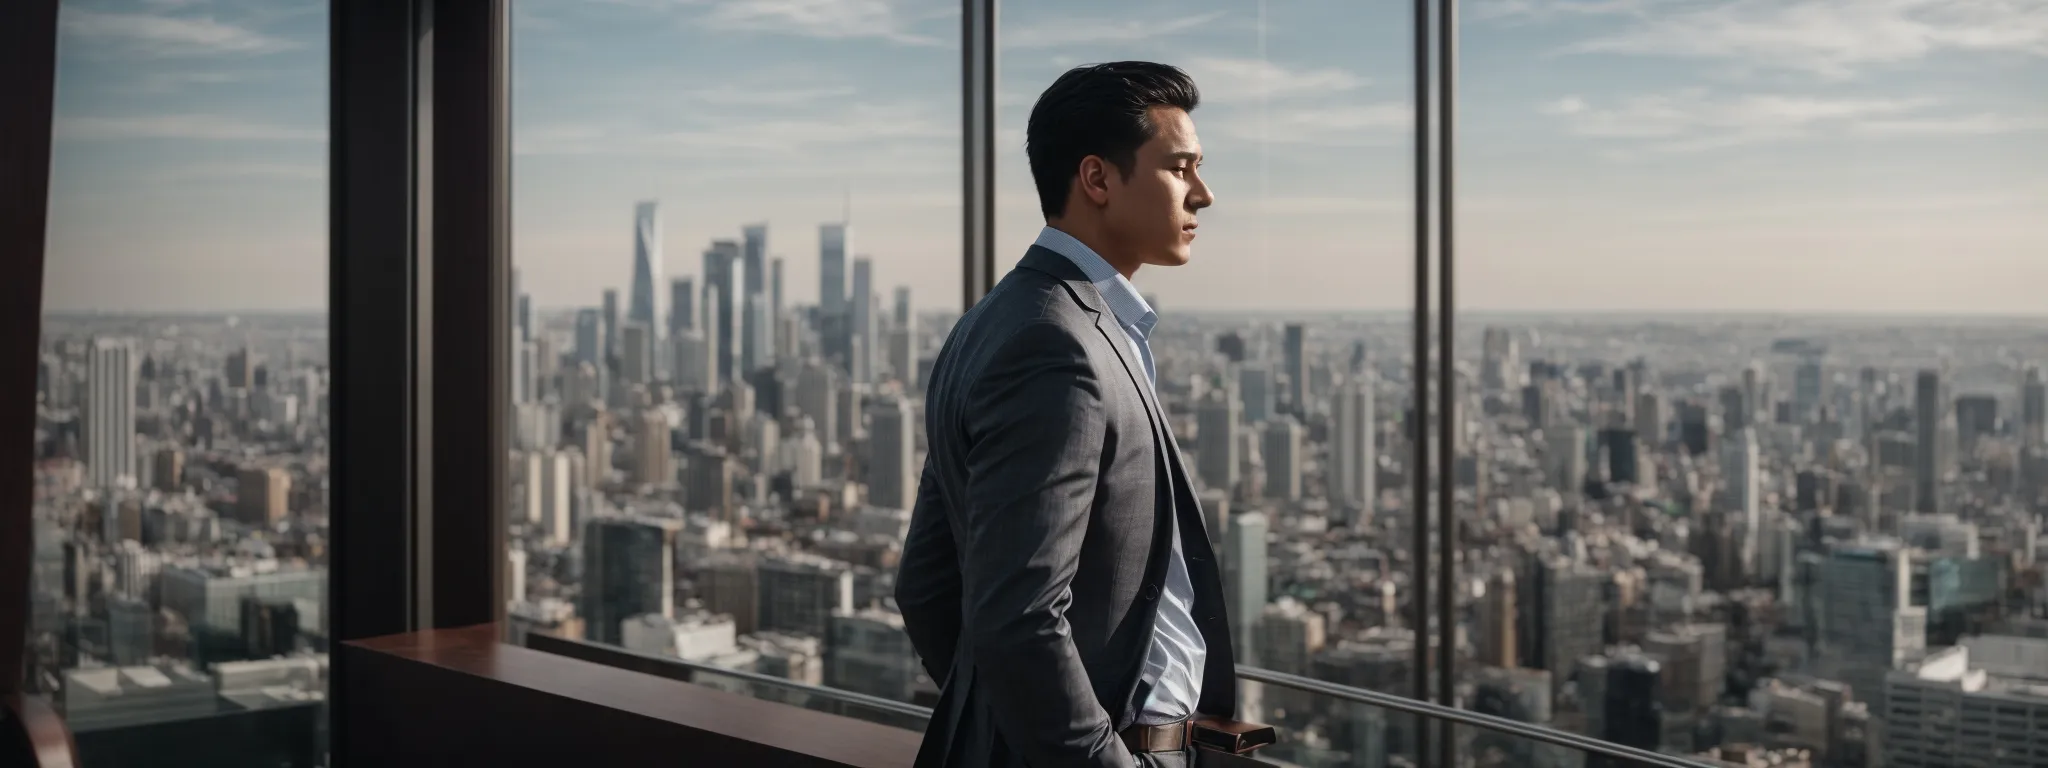 a confident entrepreneur overlooks a bustling cityscape from a high-rise, symbolizing the towering potential of a successful digital marketing agency.